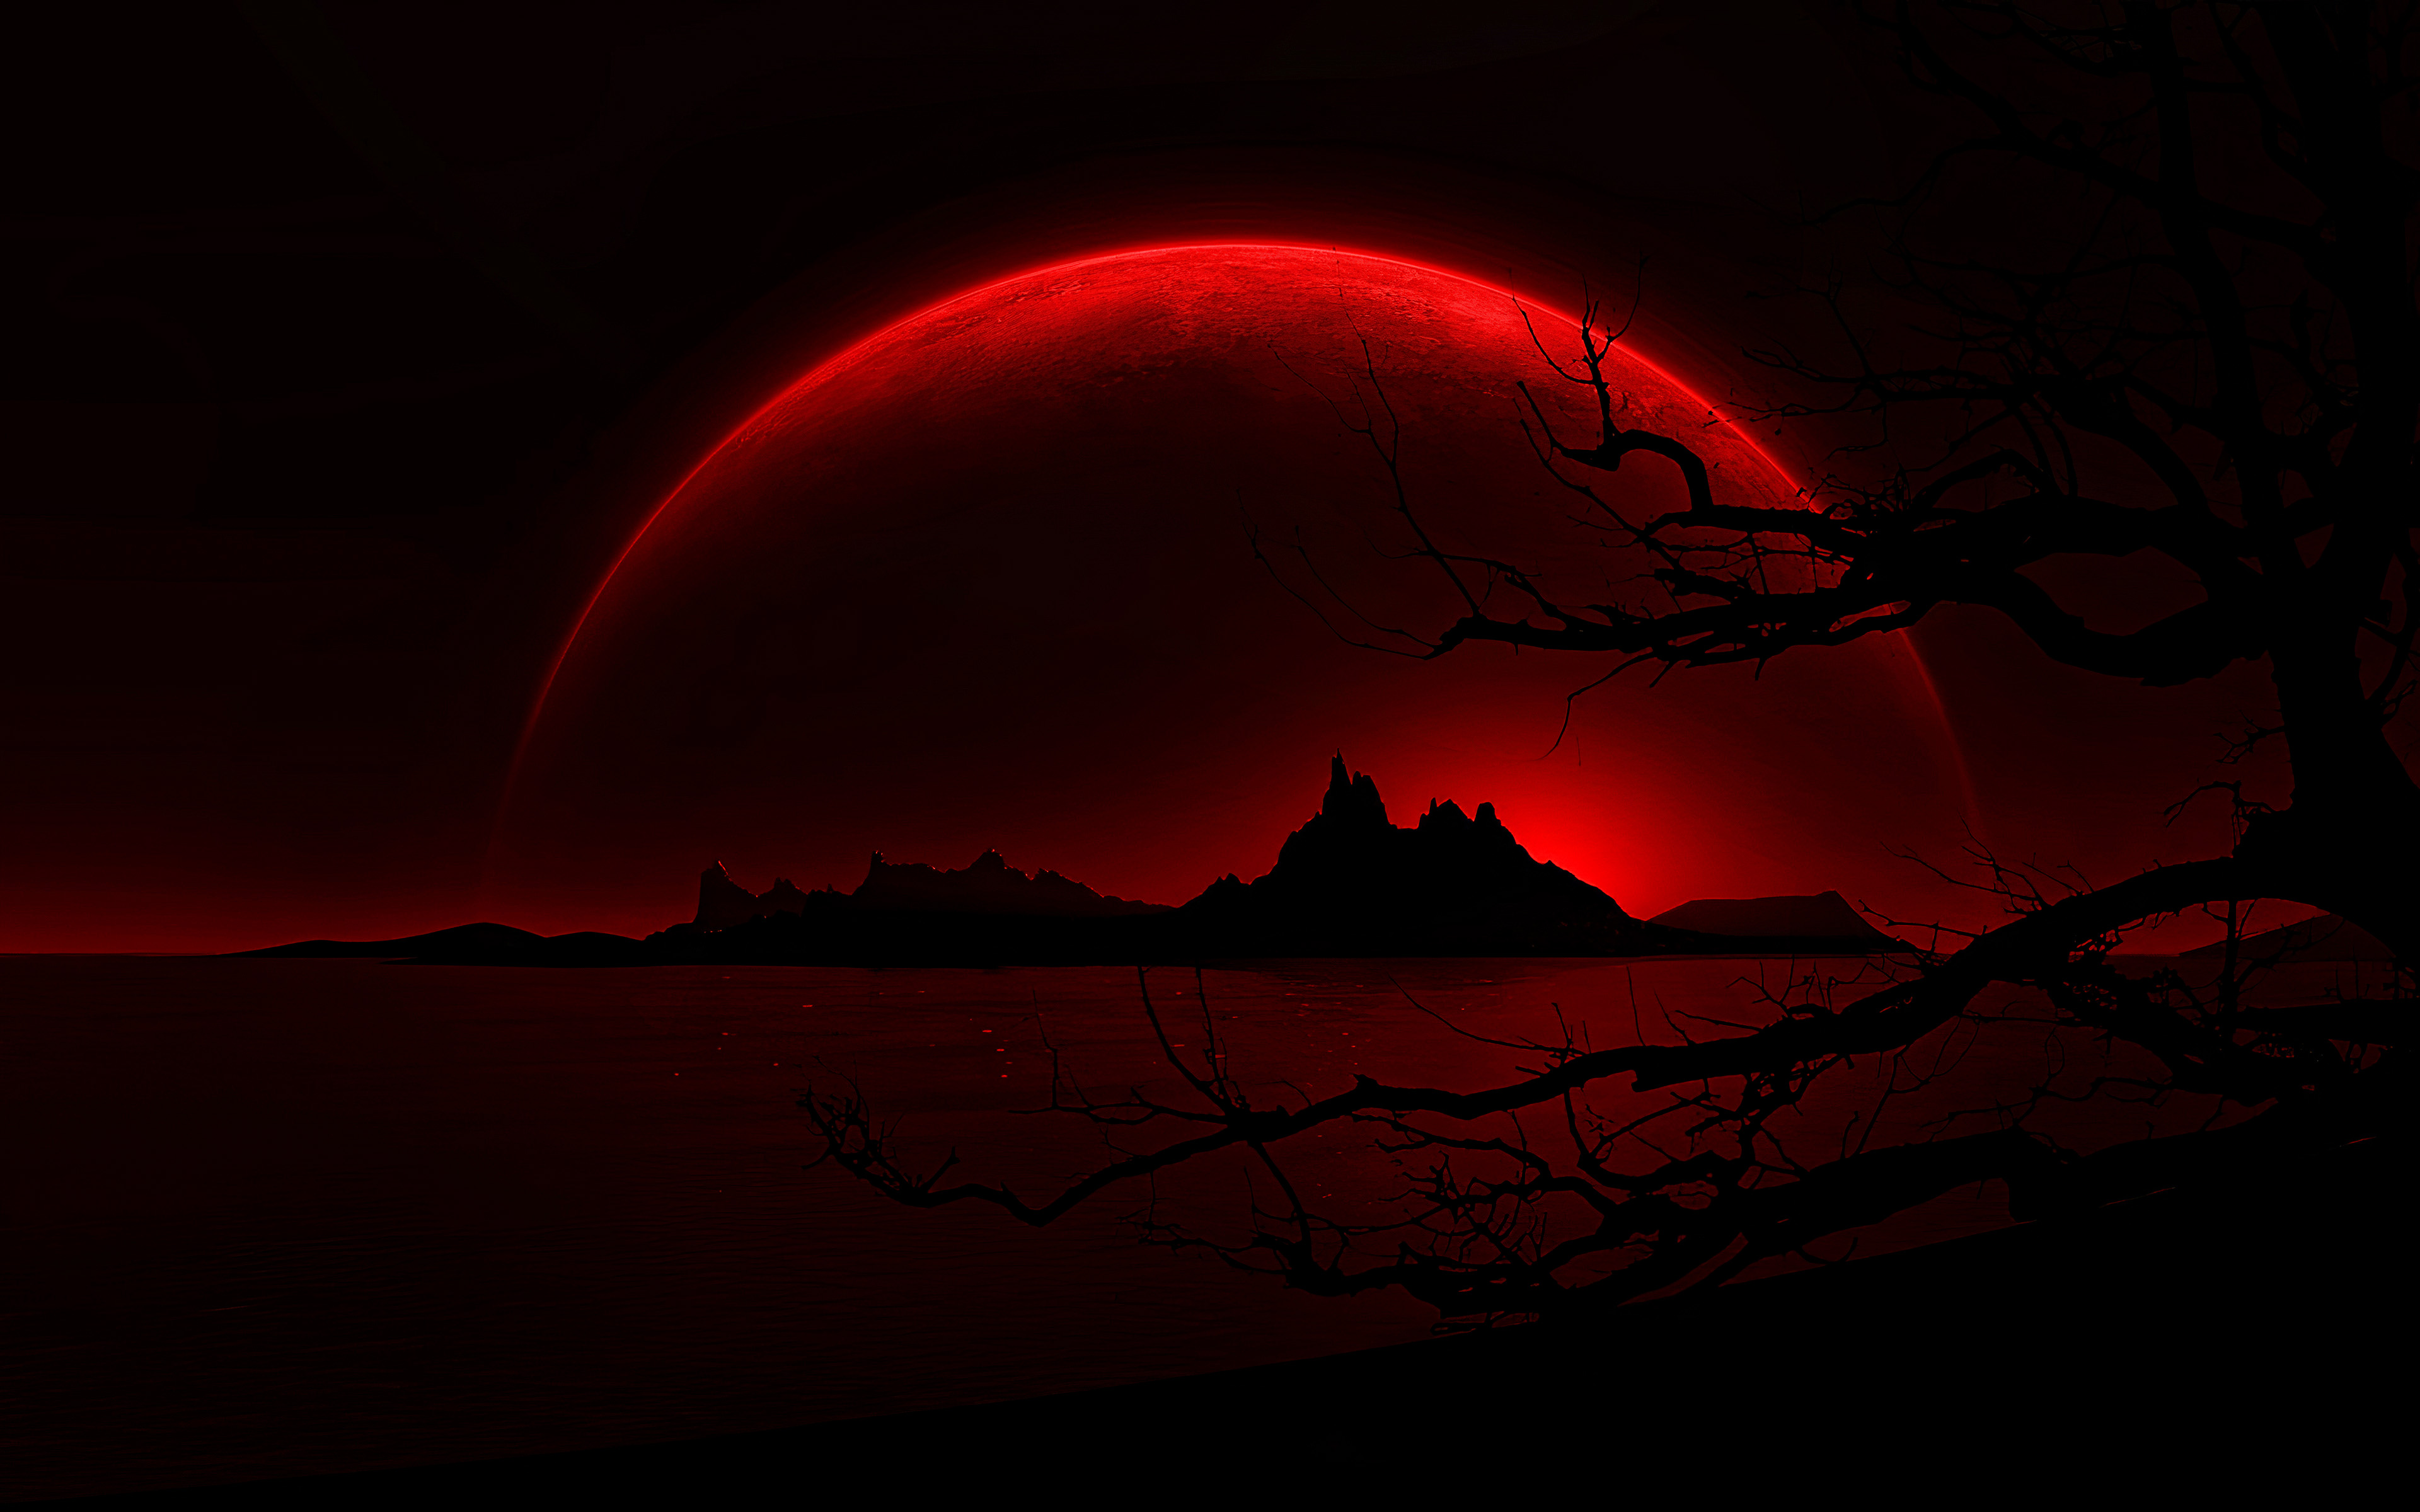 Download wallpaper silhouette of mountains, 4k, moon, red landscape, nightscapes, red planet for desktop with resolution 3840x2400. High Quality HD picture wallpaper